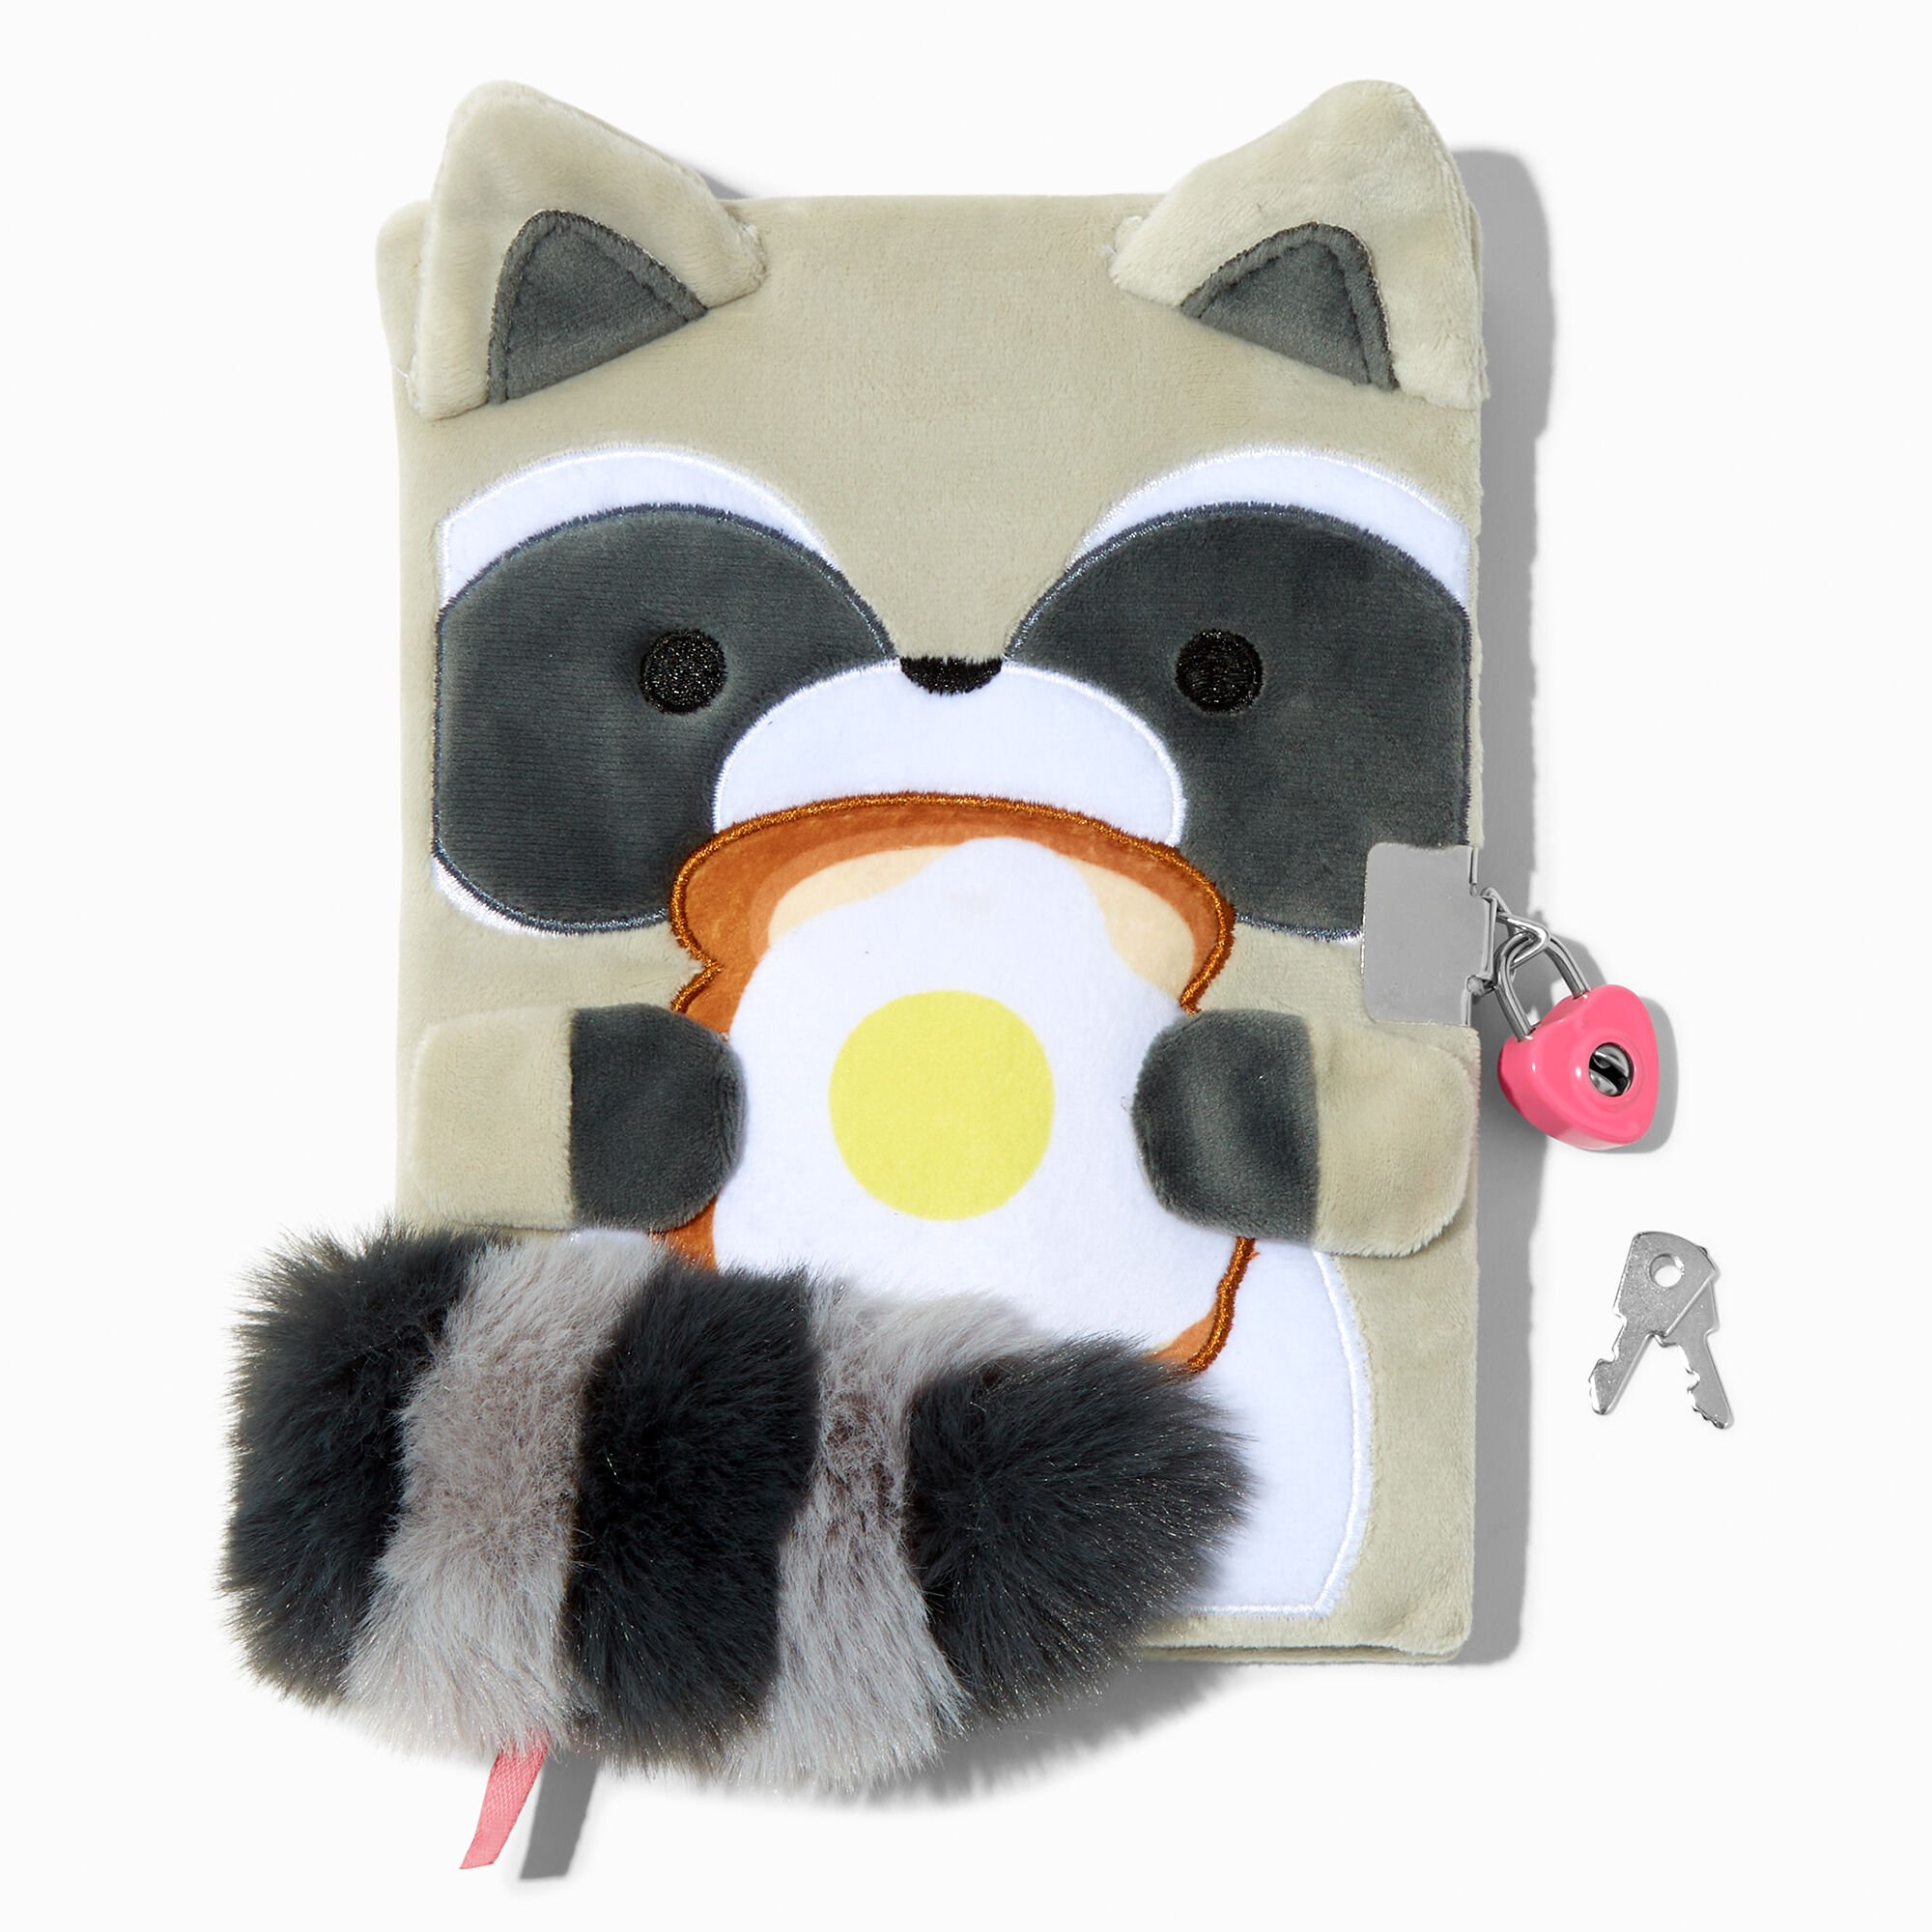 View Claires Raccoon Toast Lock Diary information